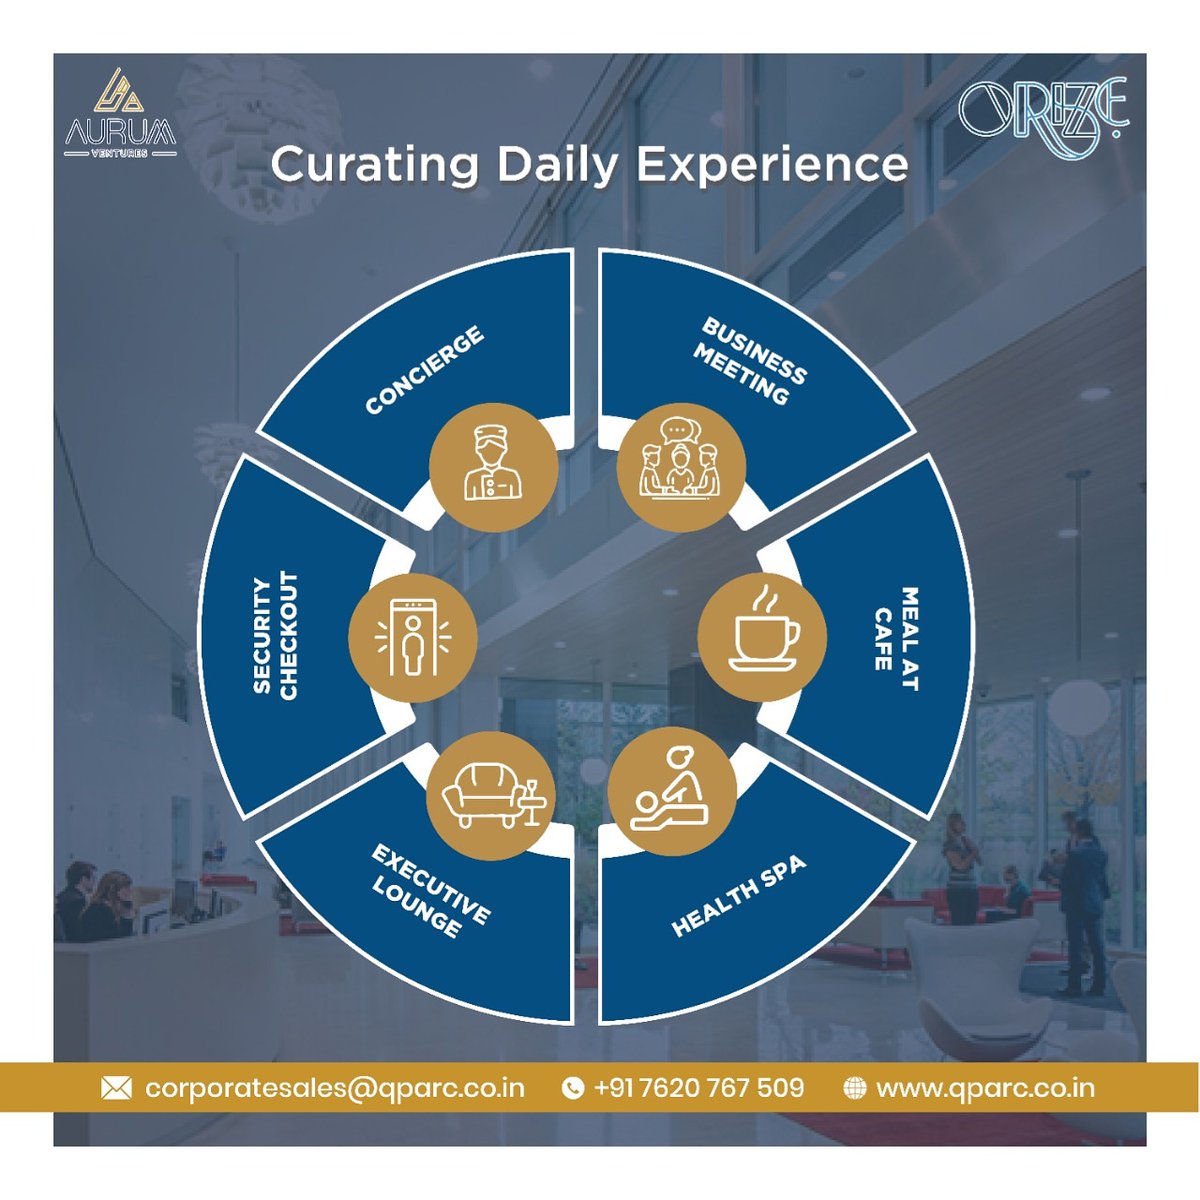 Orize service personnel create a sense of belonging right from a warm meet & greet at the concierge.

For further information please contact -7620767509

#facilitymanagement #orize #curatedexperience #amenities #orizeoperationalexcellence #aurumthemostpreferredrealestatebrand